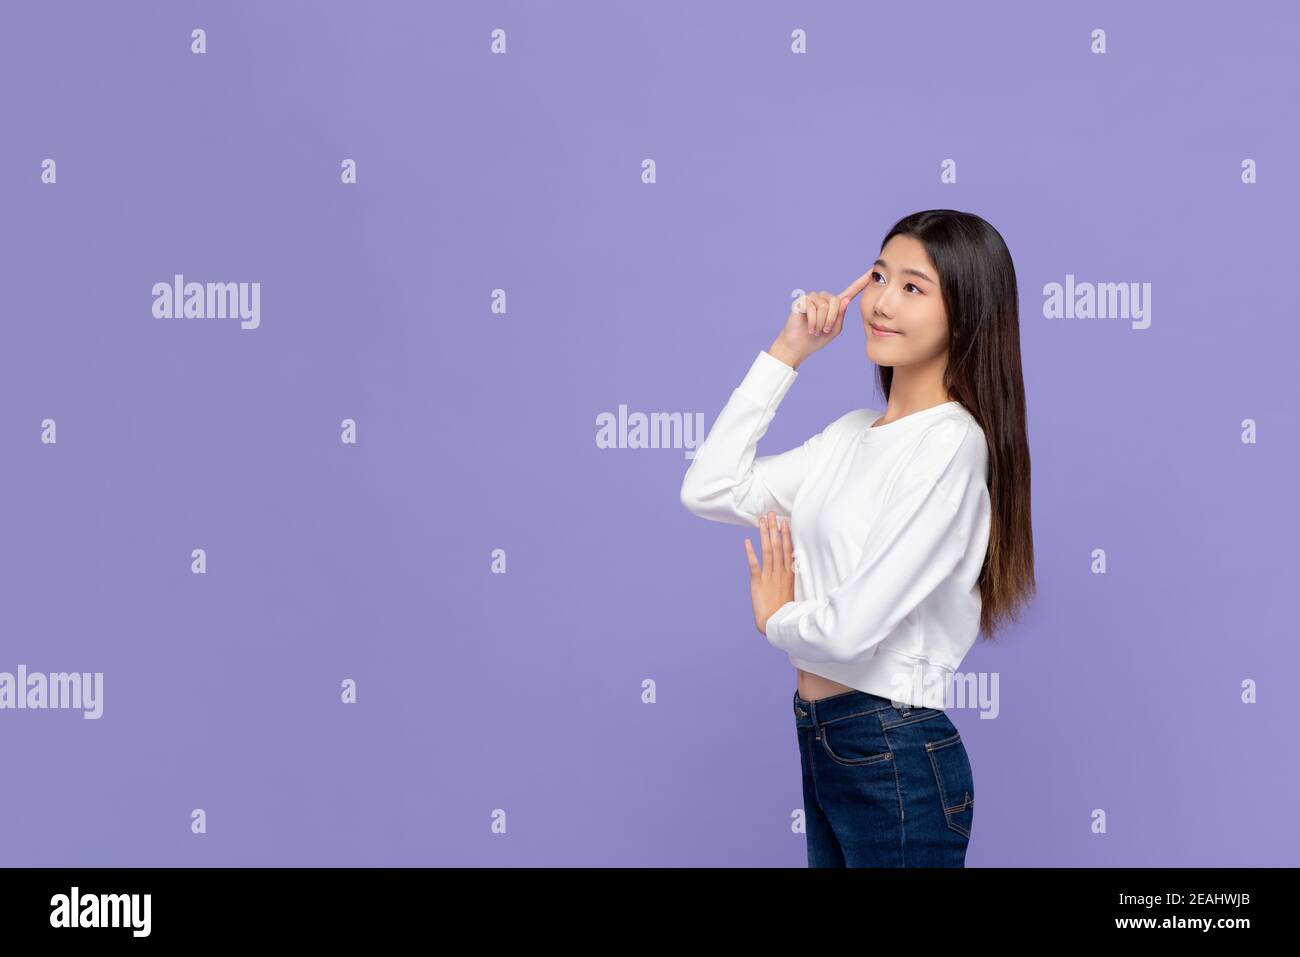 Attractive young smiling Asian woman thinking with hand touching head and looking away at empty space aside on purple background Stock Photo